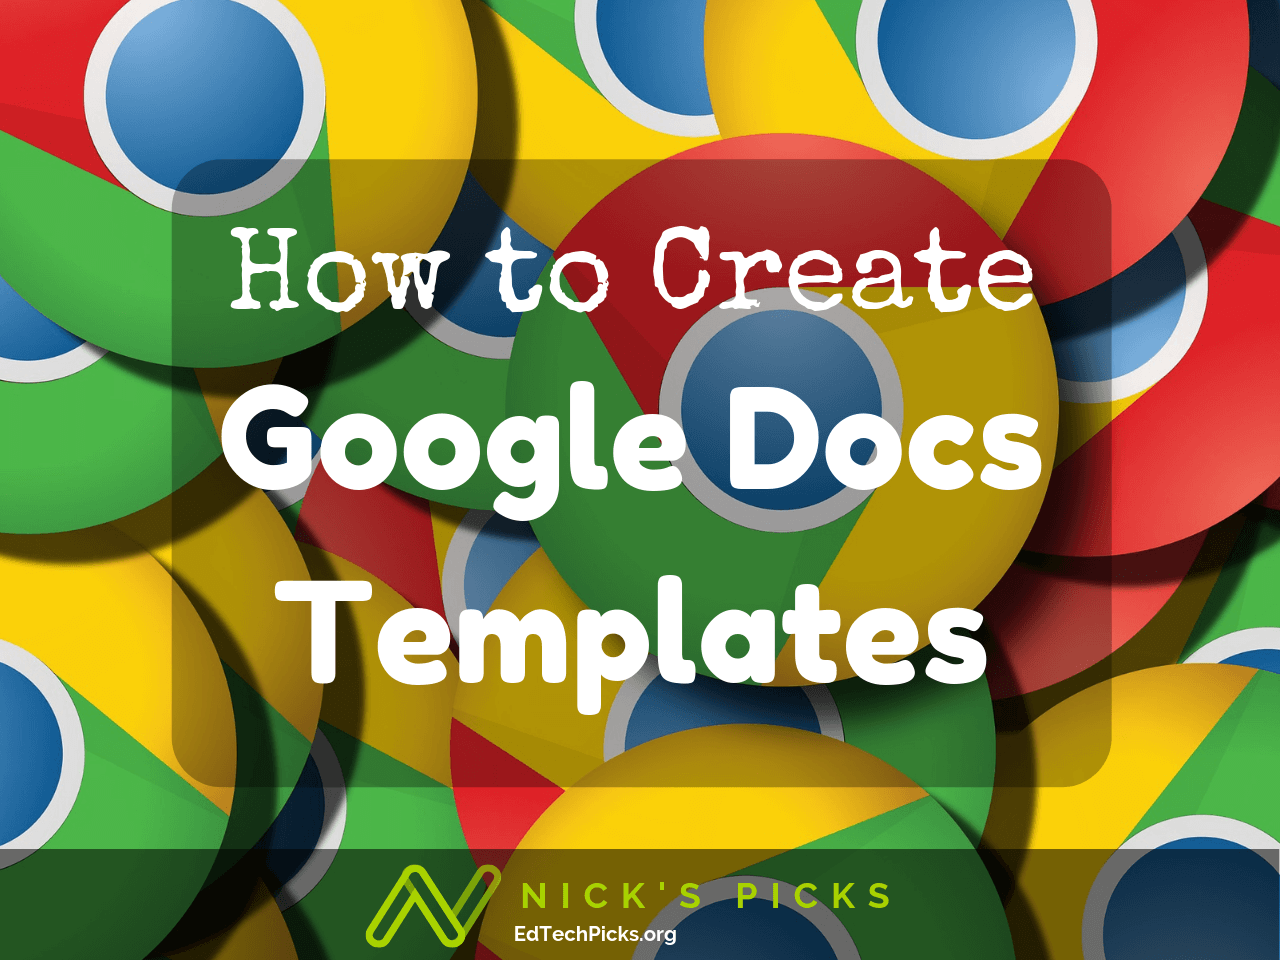 how-to-create-google-docs-templates-nick-s-picks-for-educational-technology